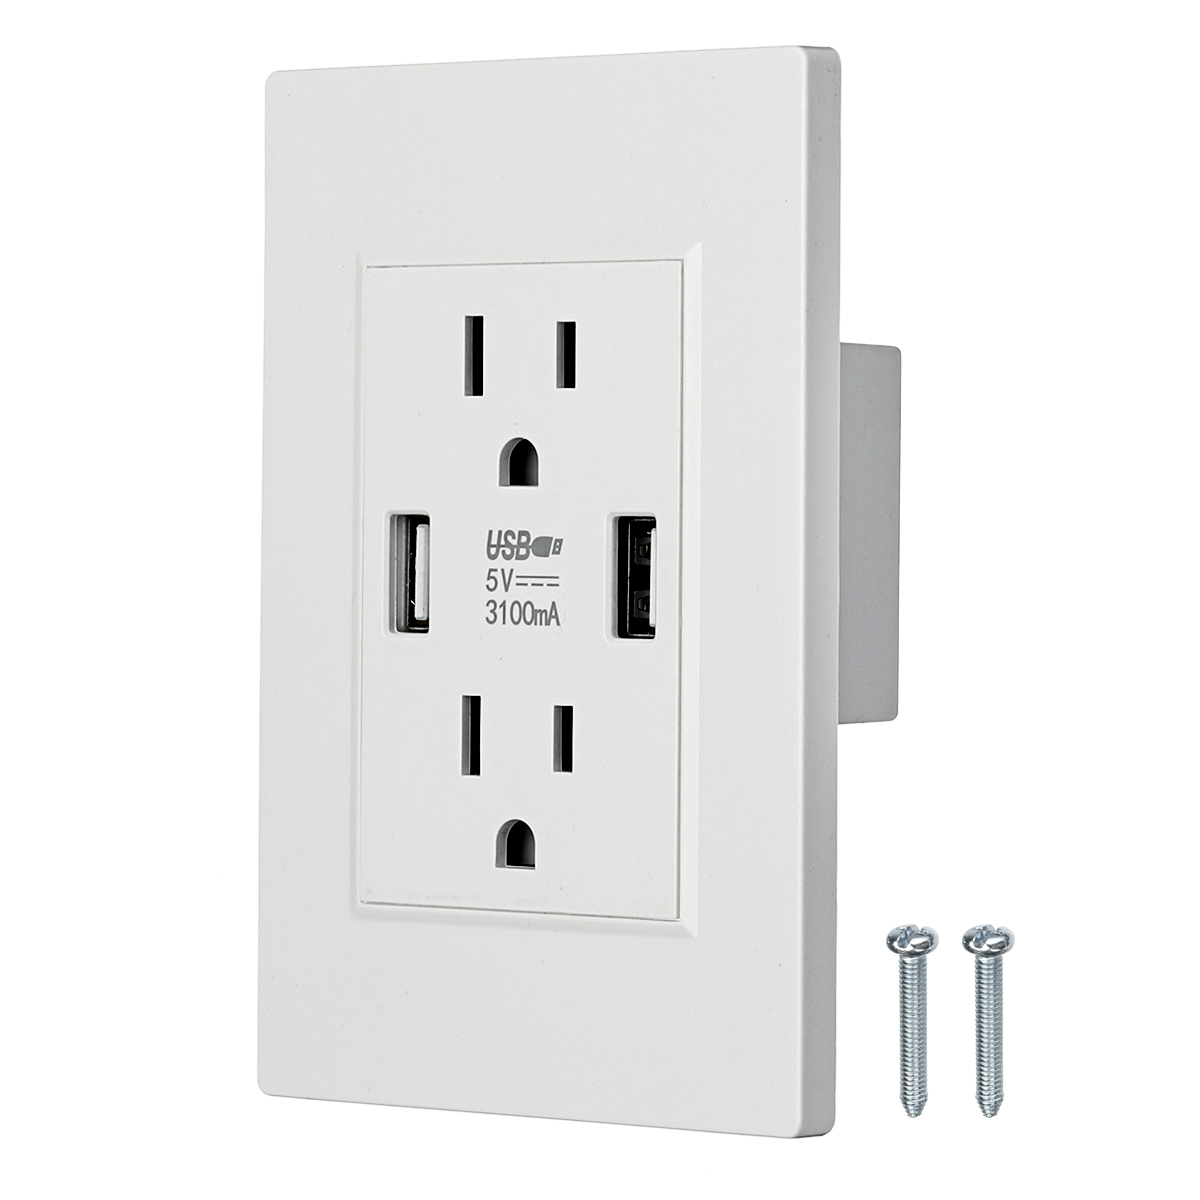 

US Standard Dual USB Wall Socket Double 2.1A/3.6A Universal Plug Socket Port Power Adapter Outlet Tamper Resistant Duplex Receptacle